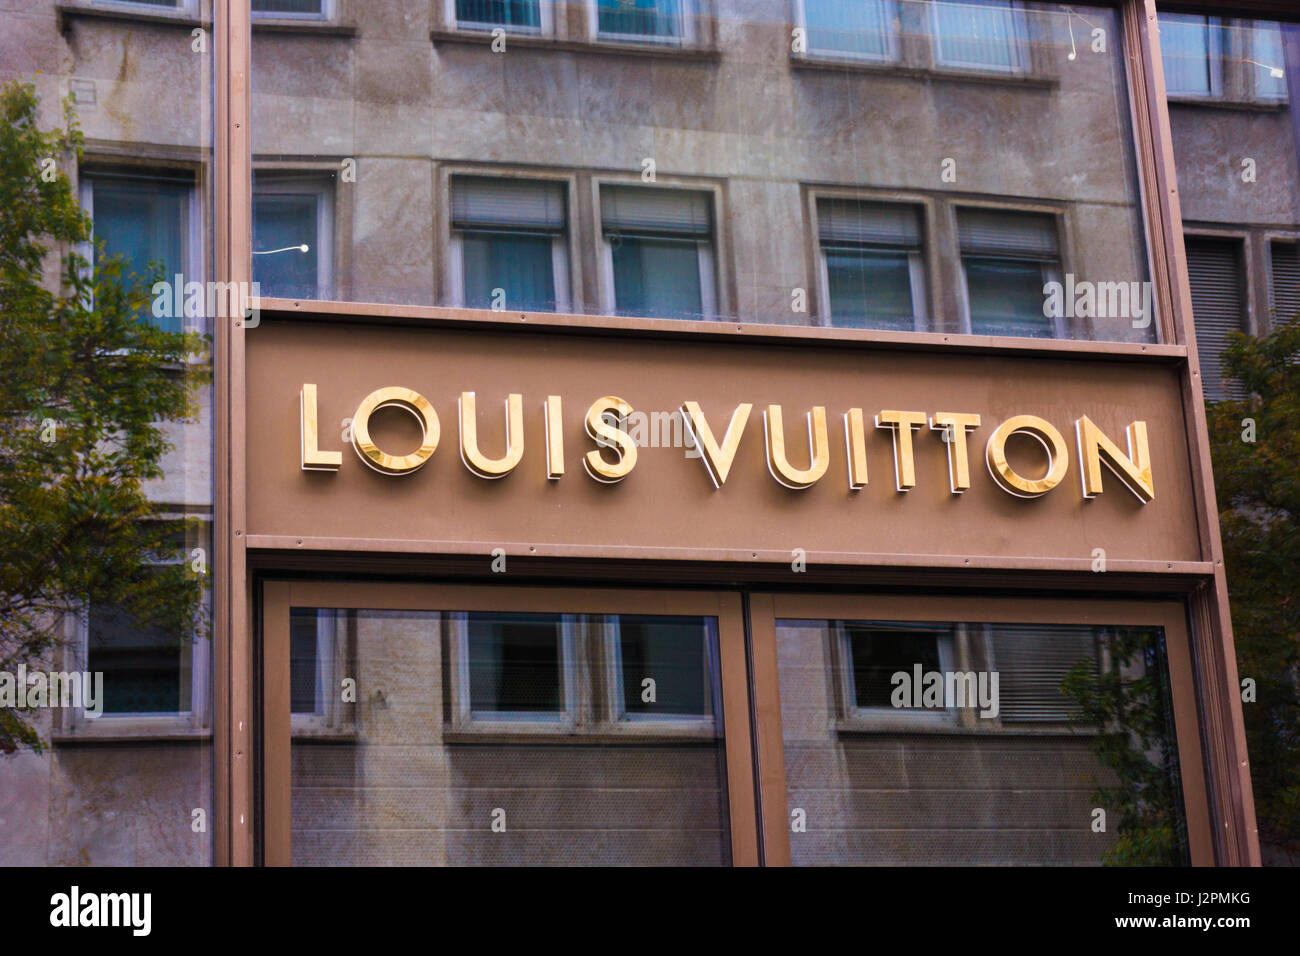 Louis Vuitton Frankfurt High Resolution Stock Photography and Images - Alamy